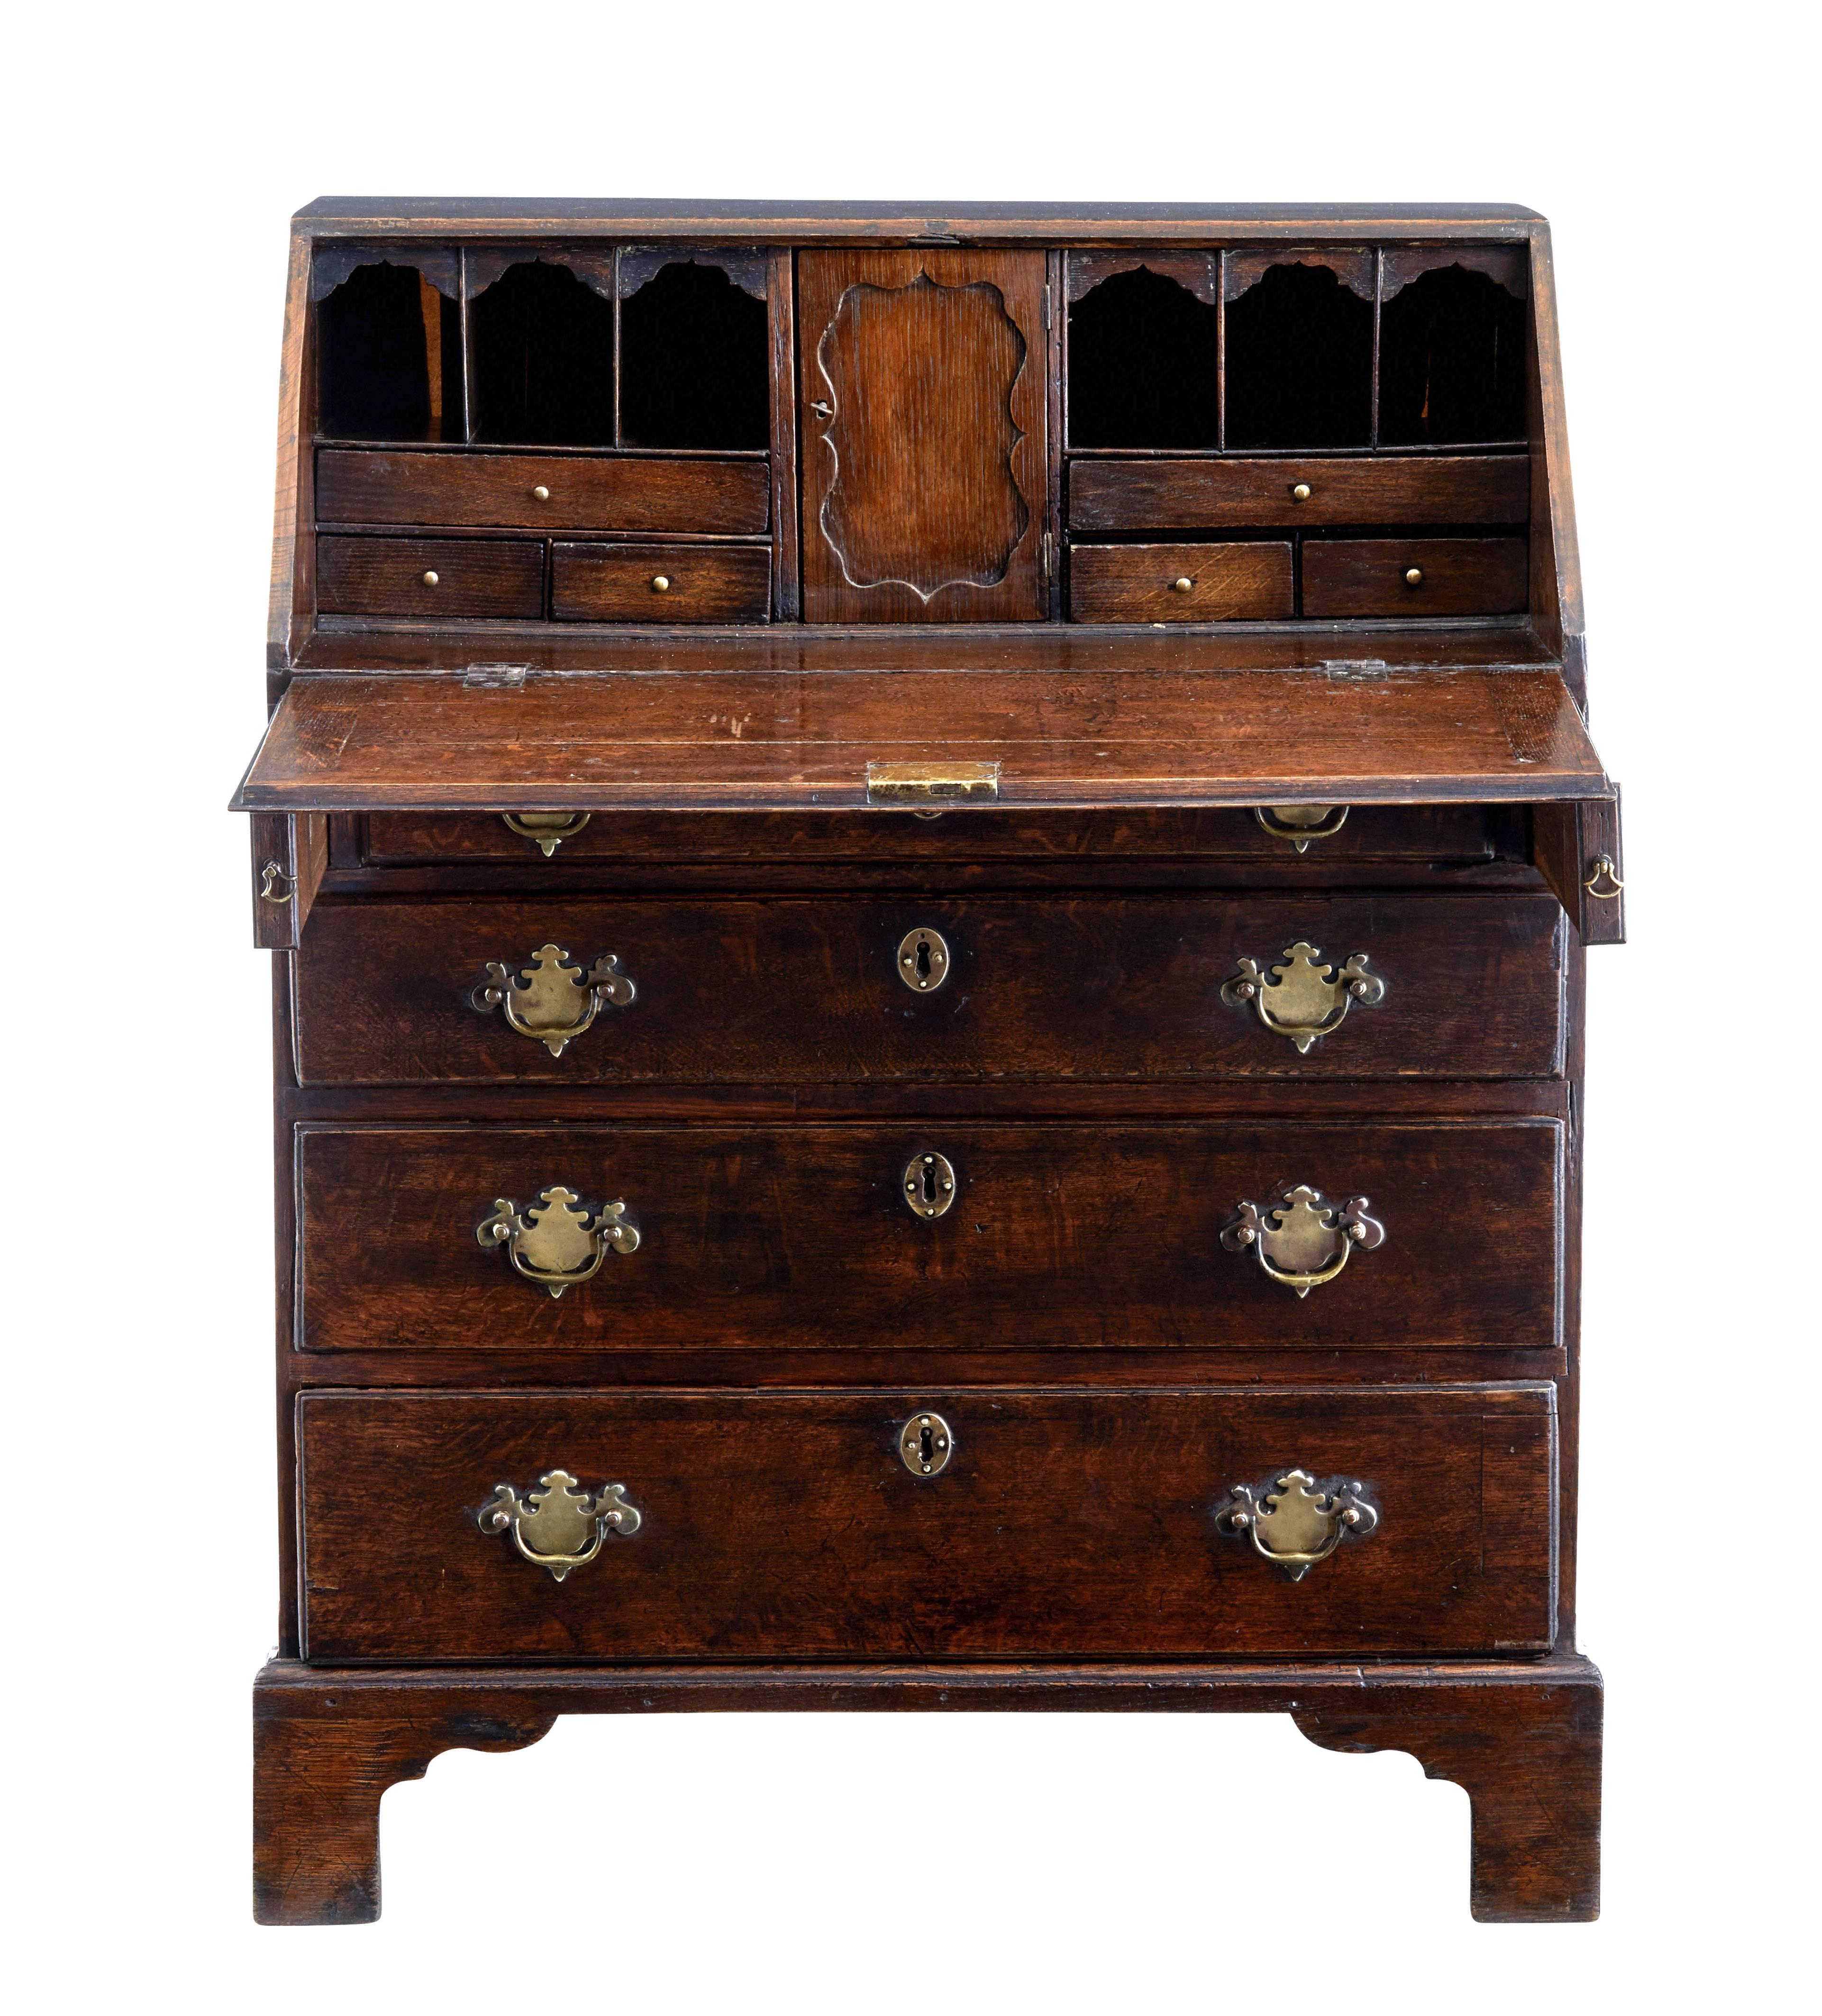 Delightful Georgian oak bureau of small proportions, circa 1740.

Fall drops to reveal a fitted interior of a central tabernacle flanked either side by pigeon holes and drawers.

Four graduating drawers to the front.

Standing on bracket